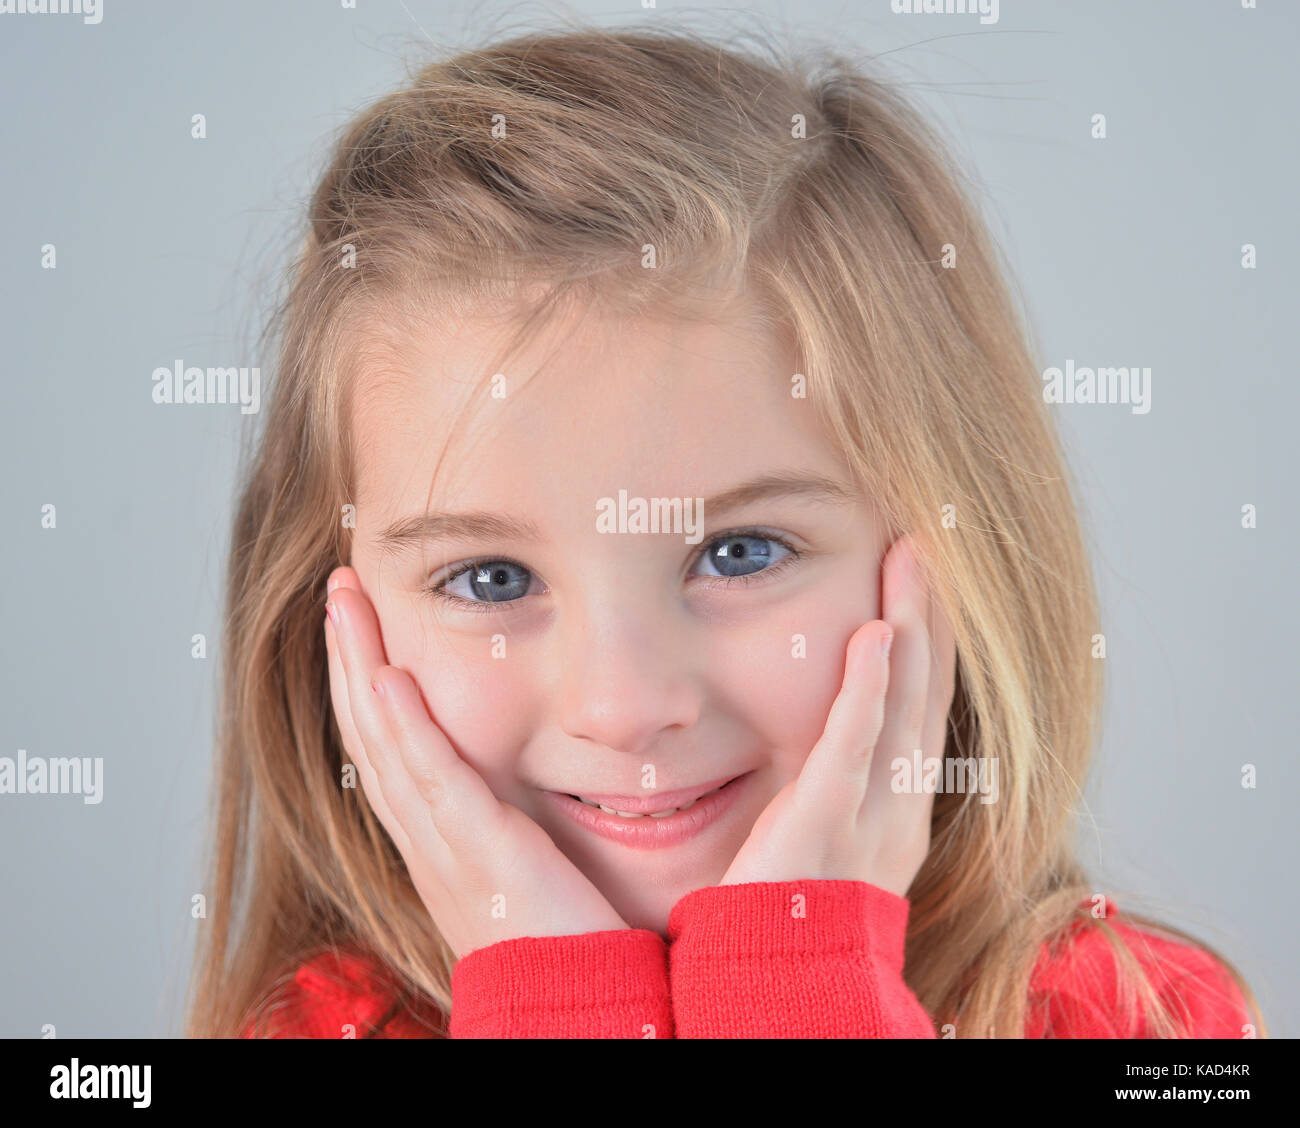 Smiling small blonde girl with blue eyes, red sweater Stock Photo